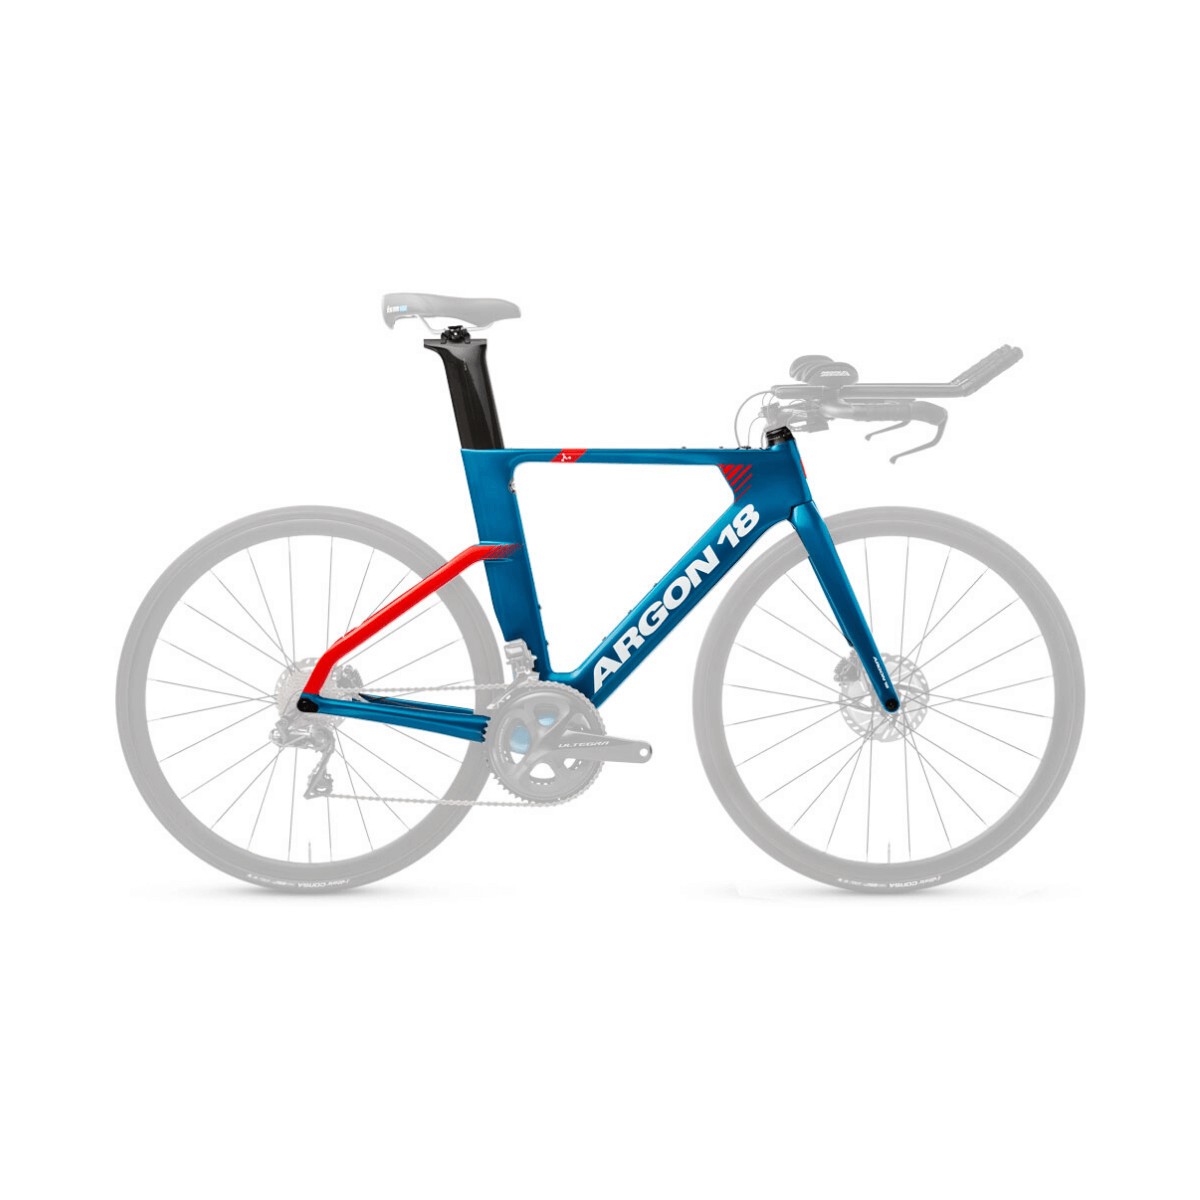 ARGON 18 E-117 Disc Frame and Fork Set Blue Red Gloss, Size M